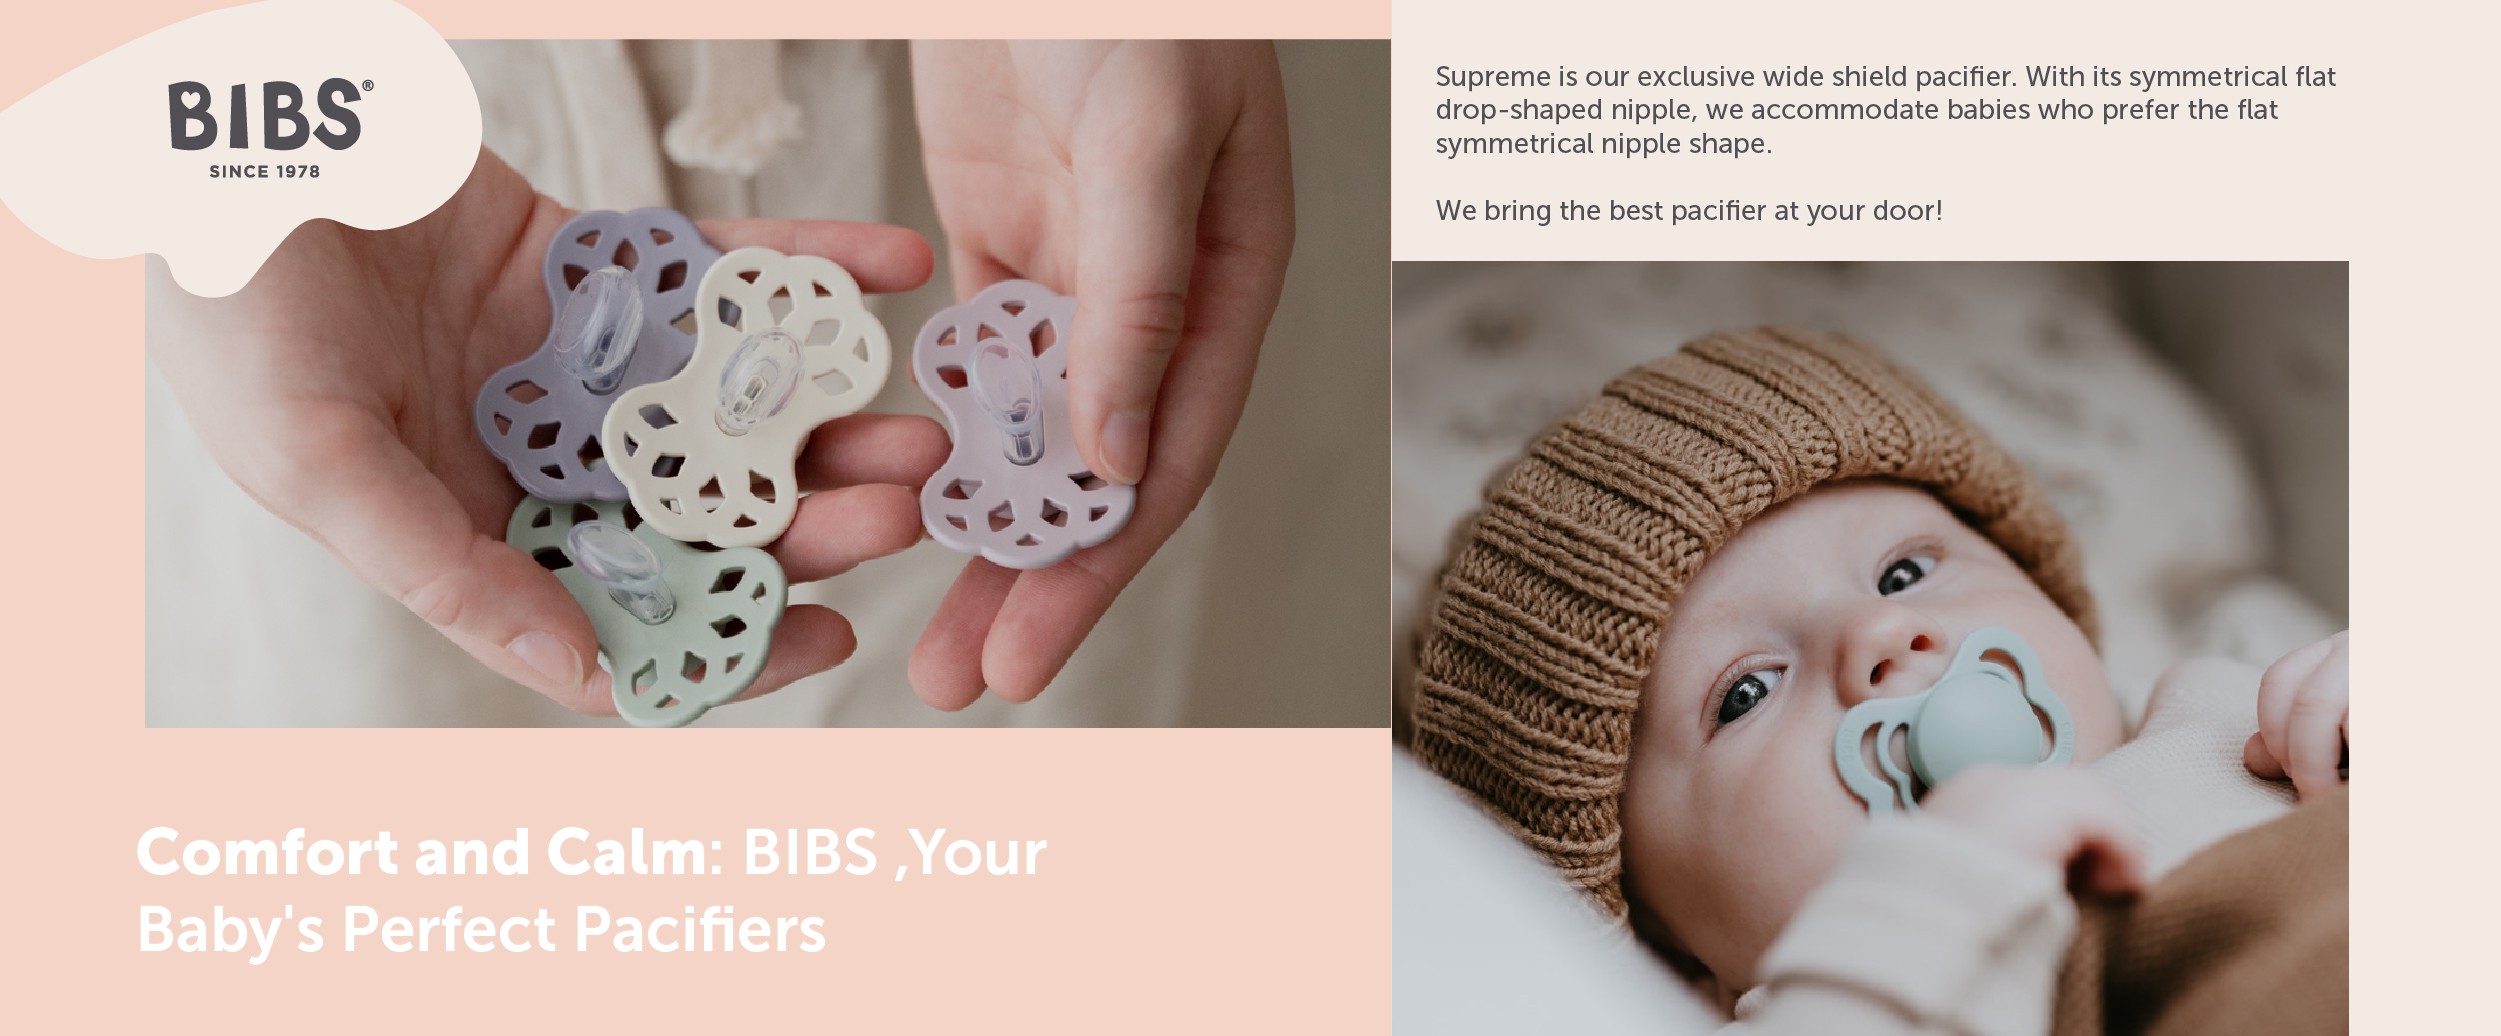 bibs pacifiers soothers accessories